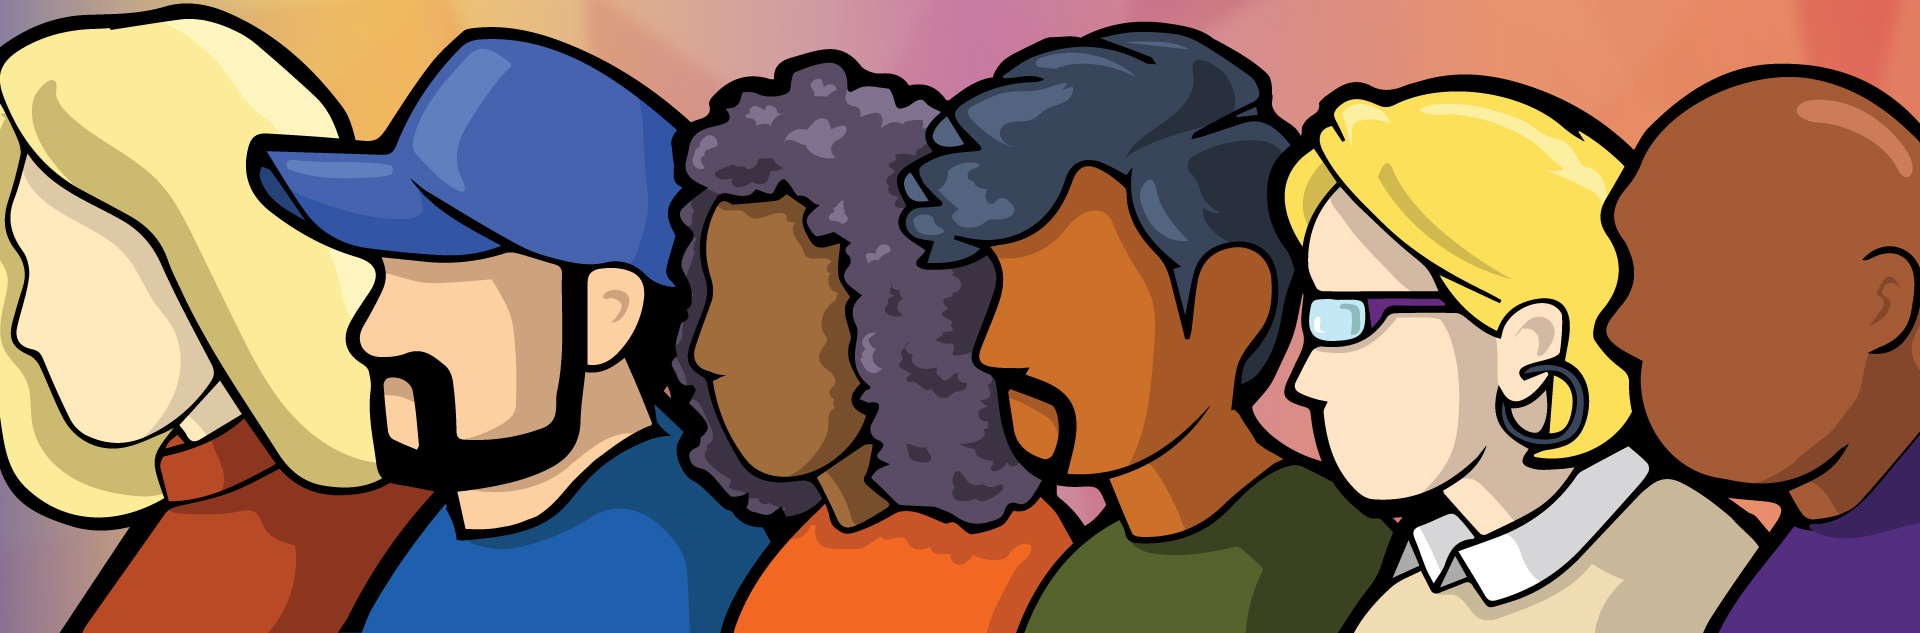 Illustrative banner image representing people of different genders, races, backgrounds.